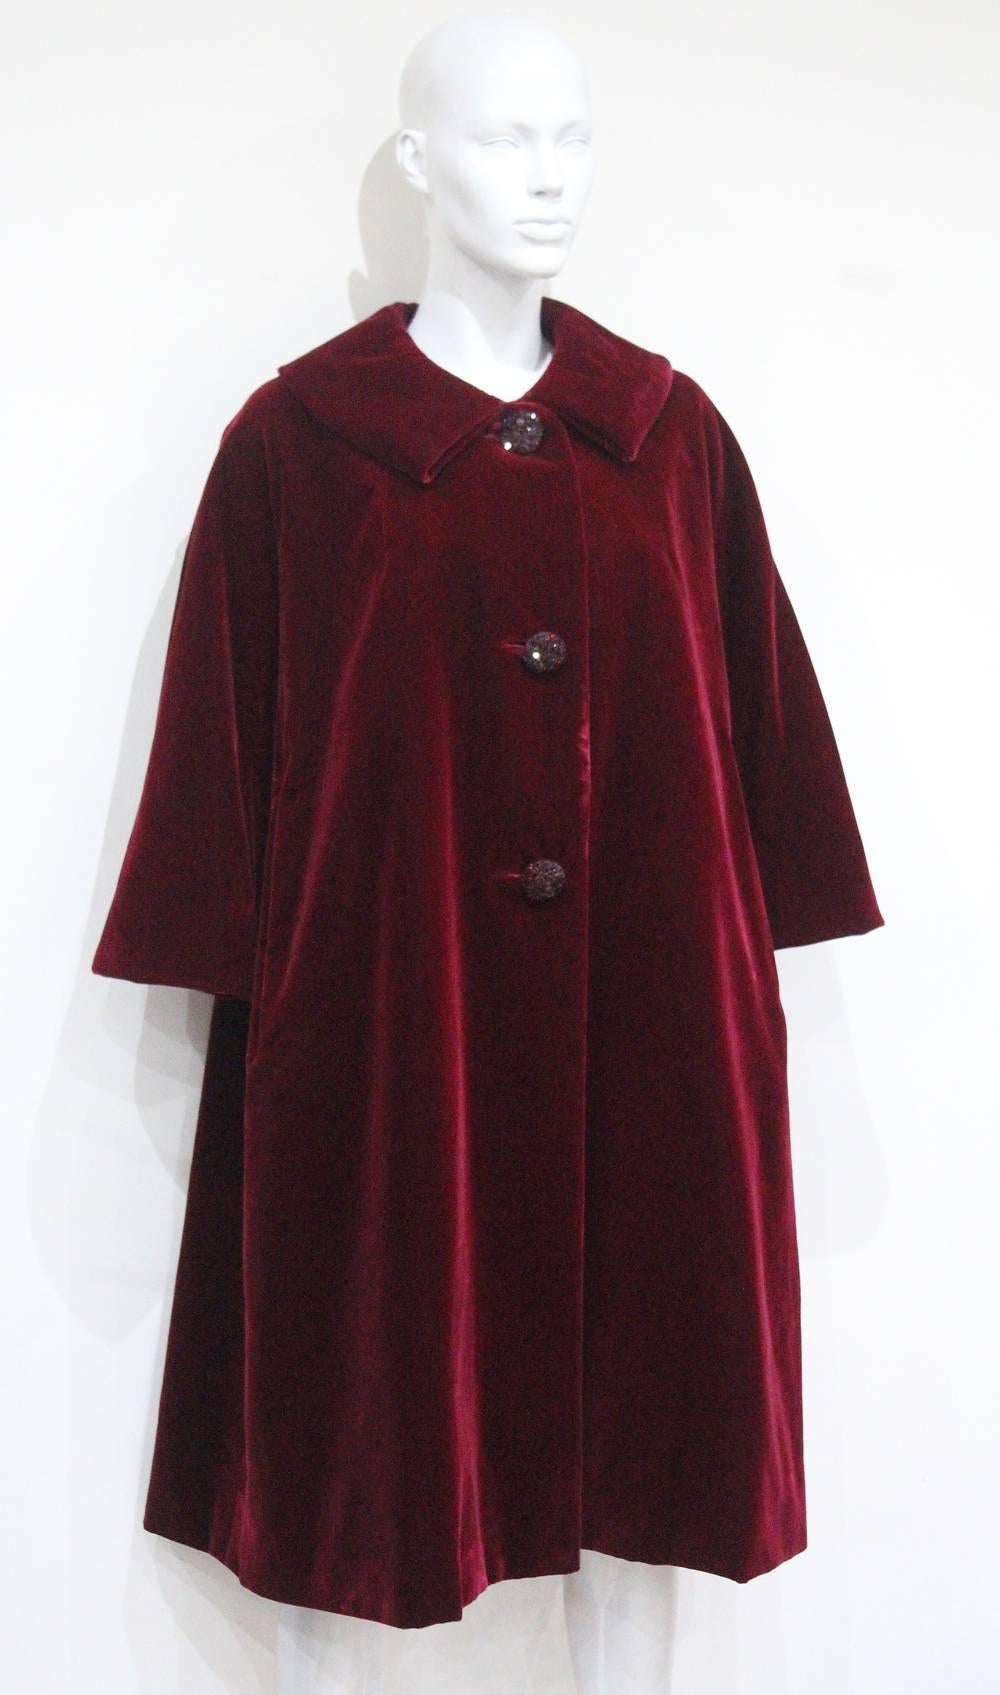 One of a Kind is proud to offer a Haute Couture Autumn/Winter 1956 extremely rare silk velvet opera coat by the house of Christian Dior. 

This evening opera coat oozes elegance with great simplicity and cut of a swing style. The coat is made of